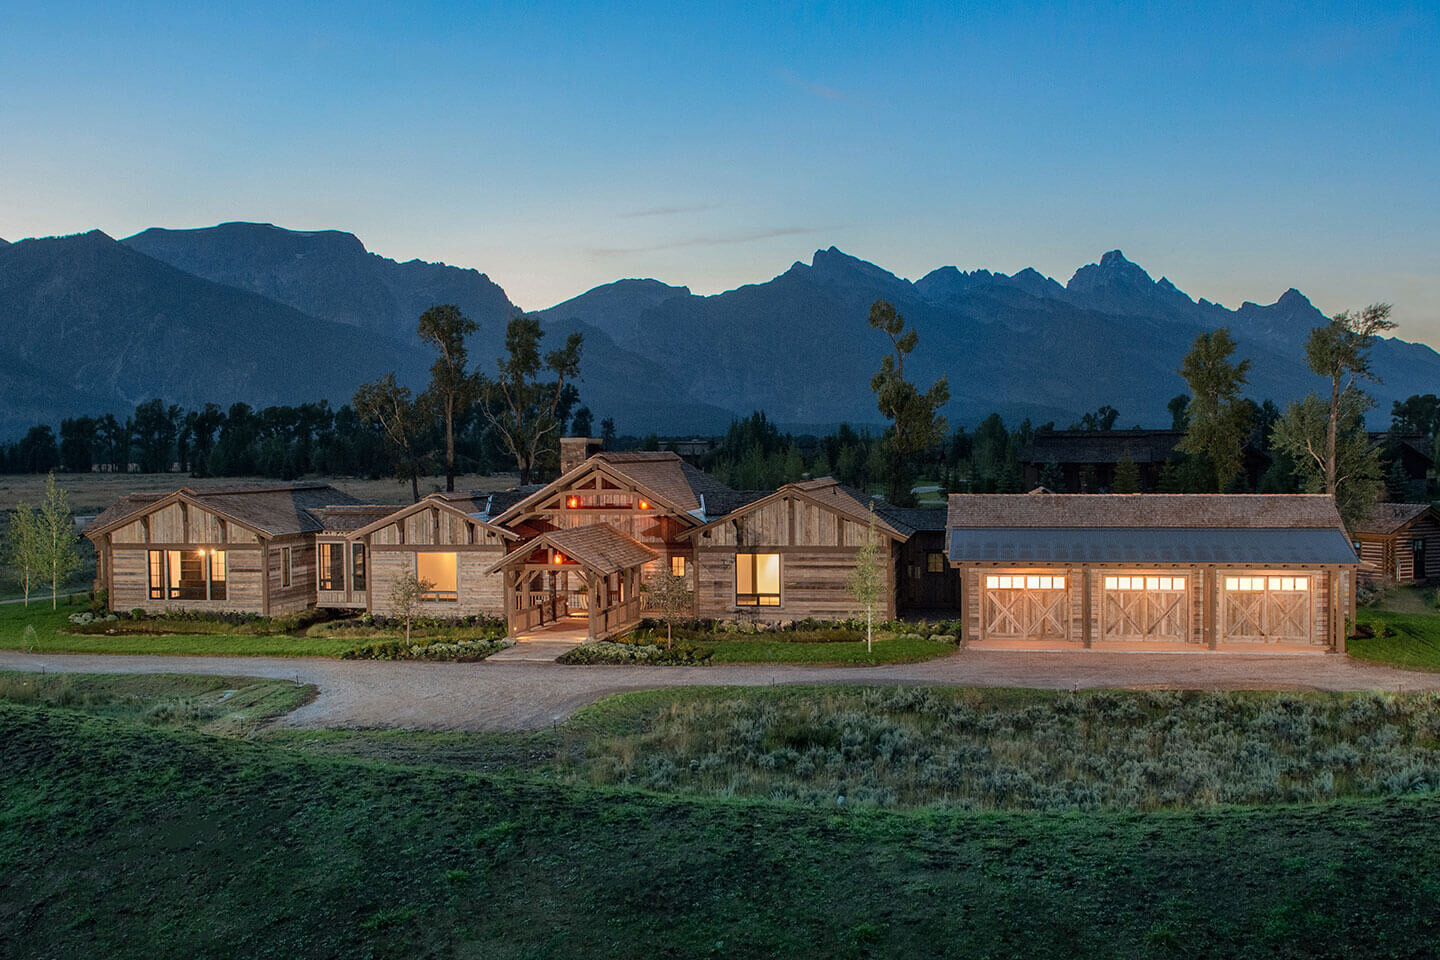 Evening view of residence with Grand Teton in background